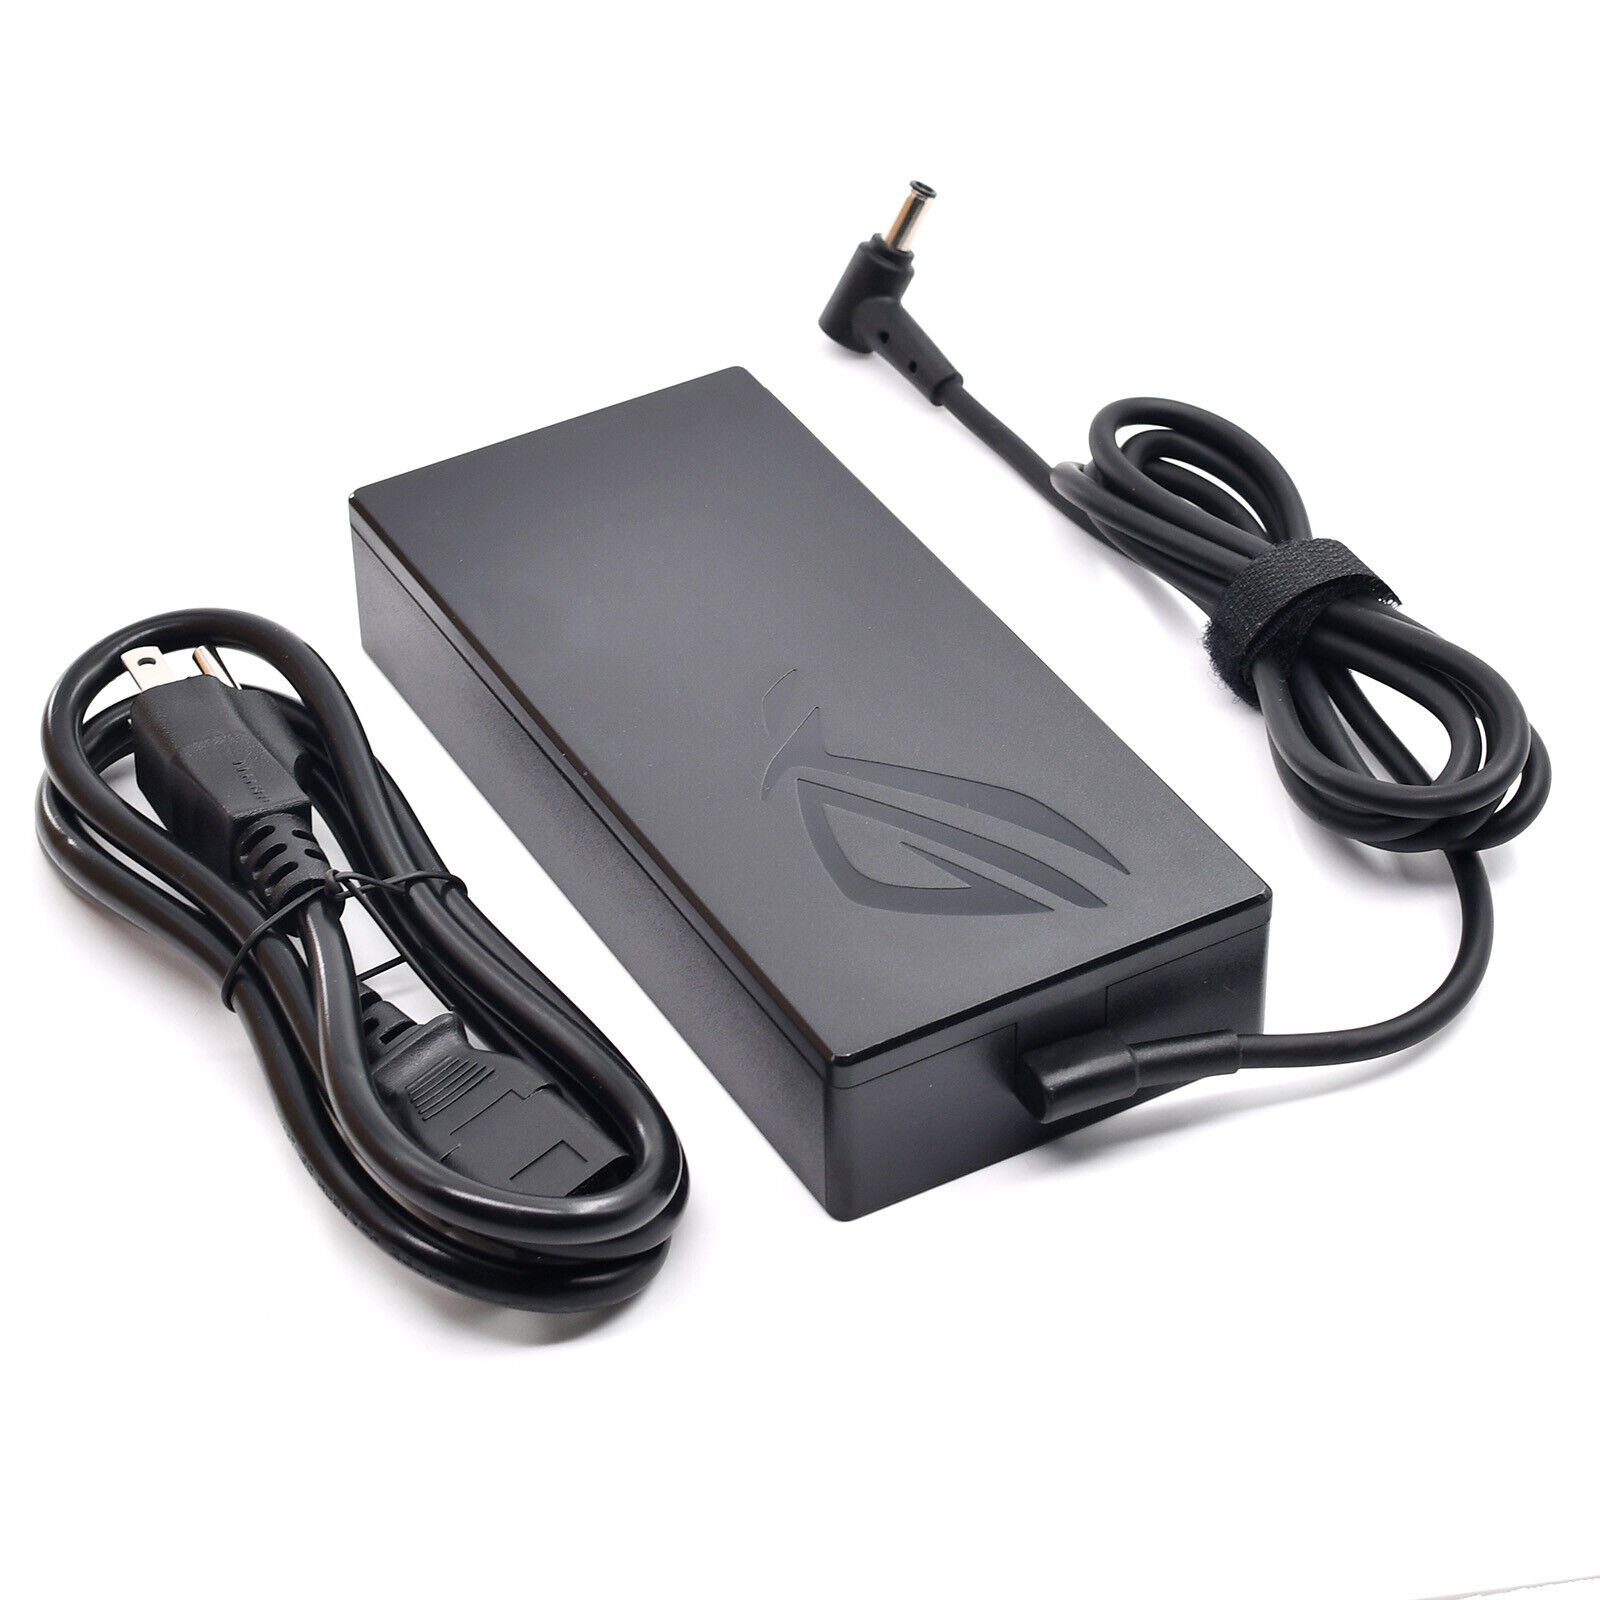 Genuine ASUS 150W Laptop Charger A18-150P1A ADP-150CH B Original AC Adapter